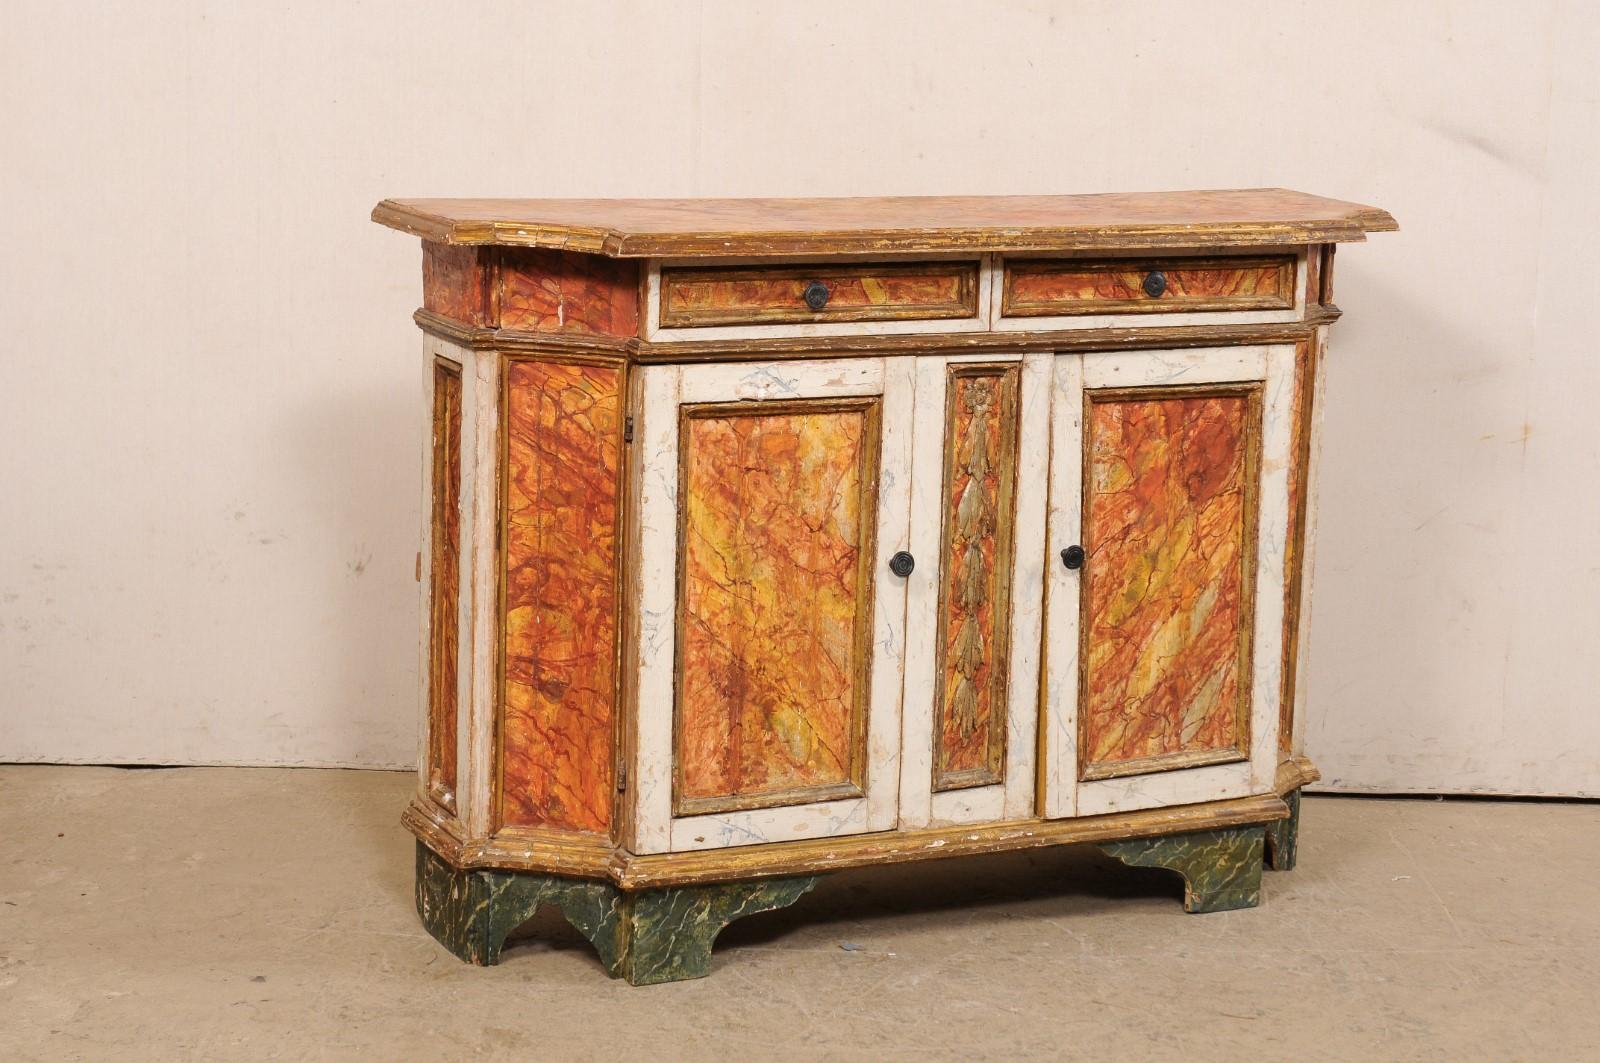 An Italian carved and painted wood credenza from the 18th century. This antique cabinet from Italy has a rectangular-shape, with front corners convexly scalloped inward, giving this piece a lovely shaped. The case houses a pair of smaller sized